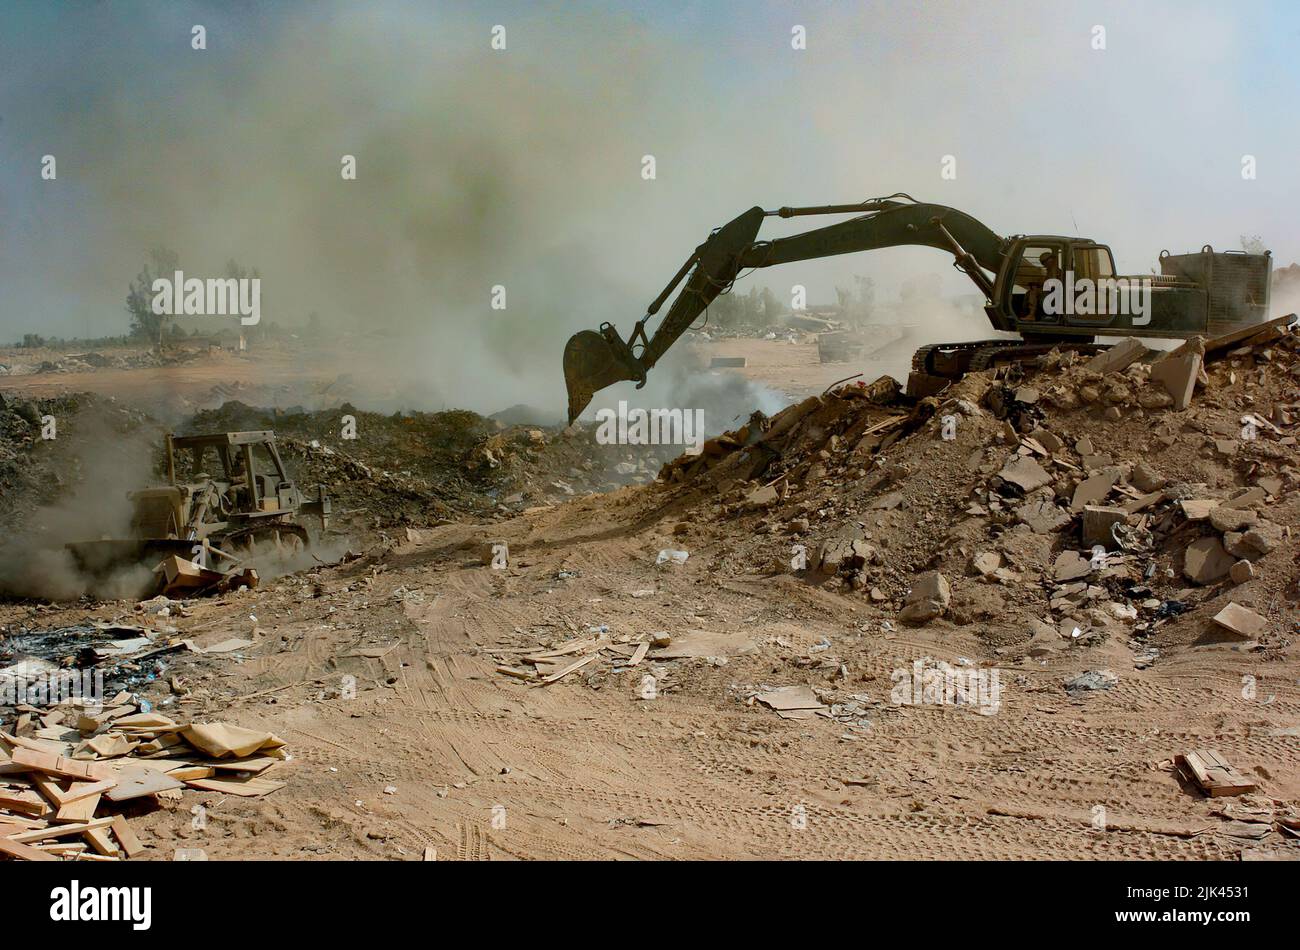 (LOGISTICS SUPPORT AREA ANACONDA, Balad, Iraq) - Soldiers from the 84th Combat Engineer Battalion use a bulldozer and excavator to manuever trash and other burnable items around in the burn pit at the landfill here. The bulldozer is primarily used to keep refuse constantly burning, and the excavator to push dirt over chutes to make the land useable in the future. Stock Photo